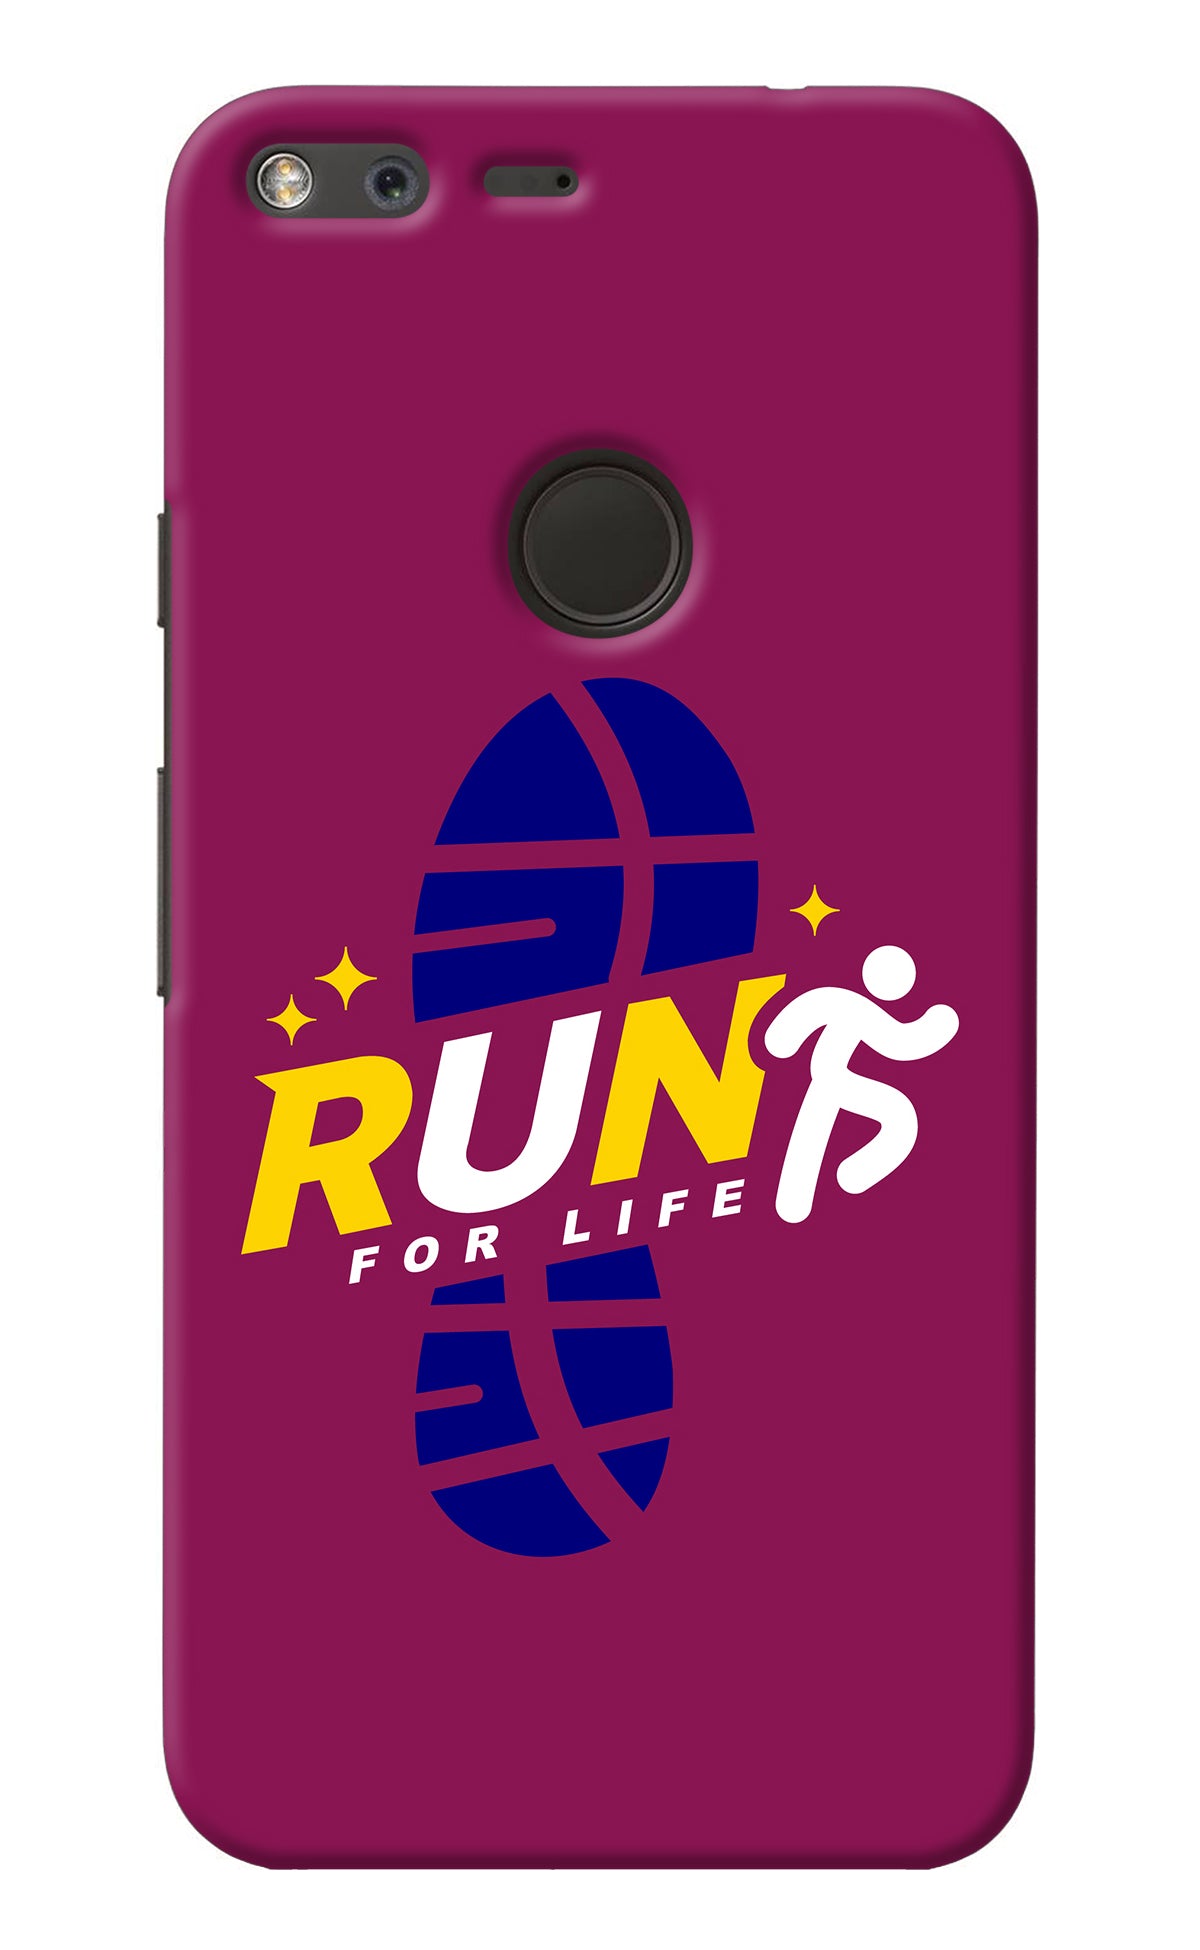 Run for Life Google Pixel XL Back Cover